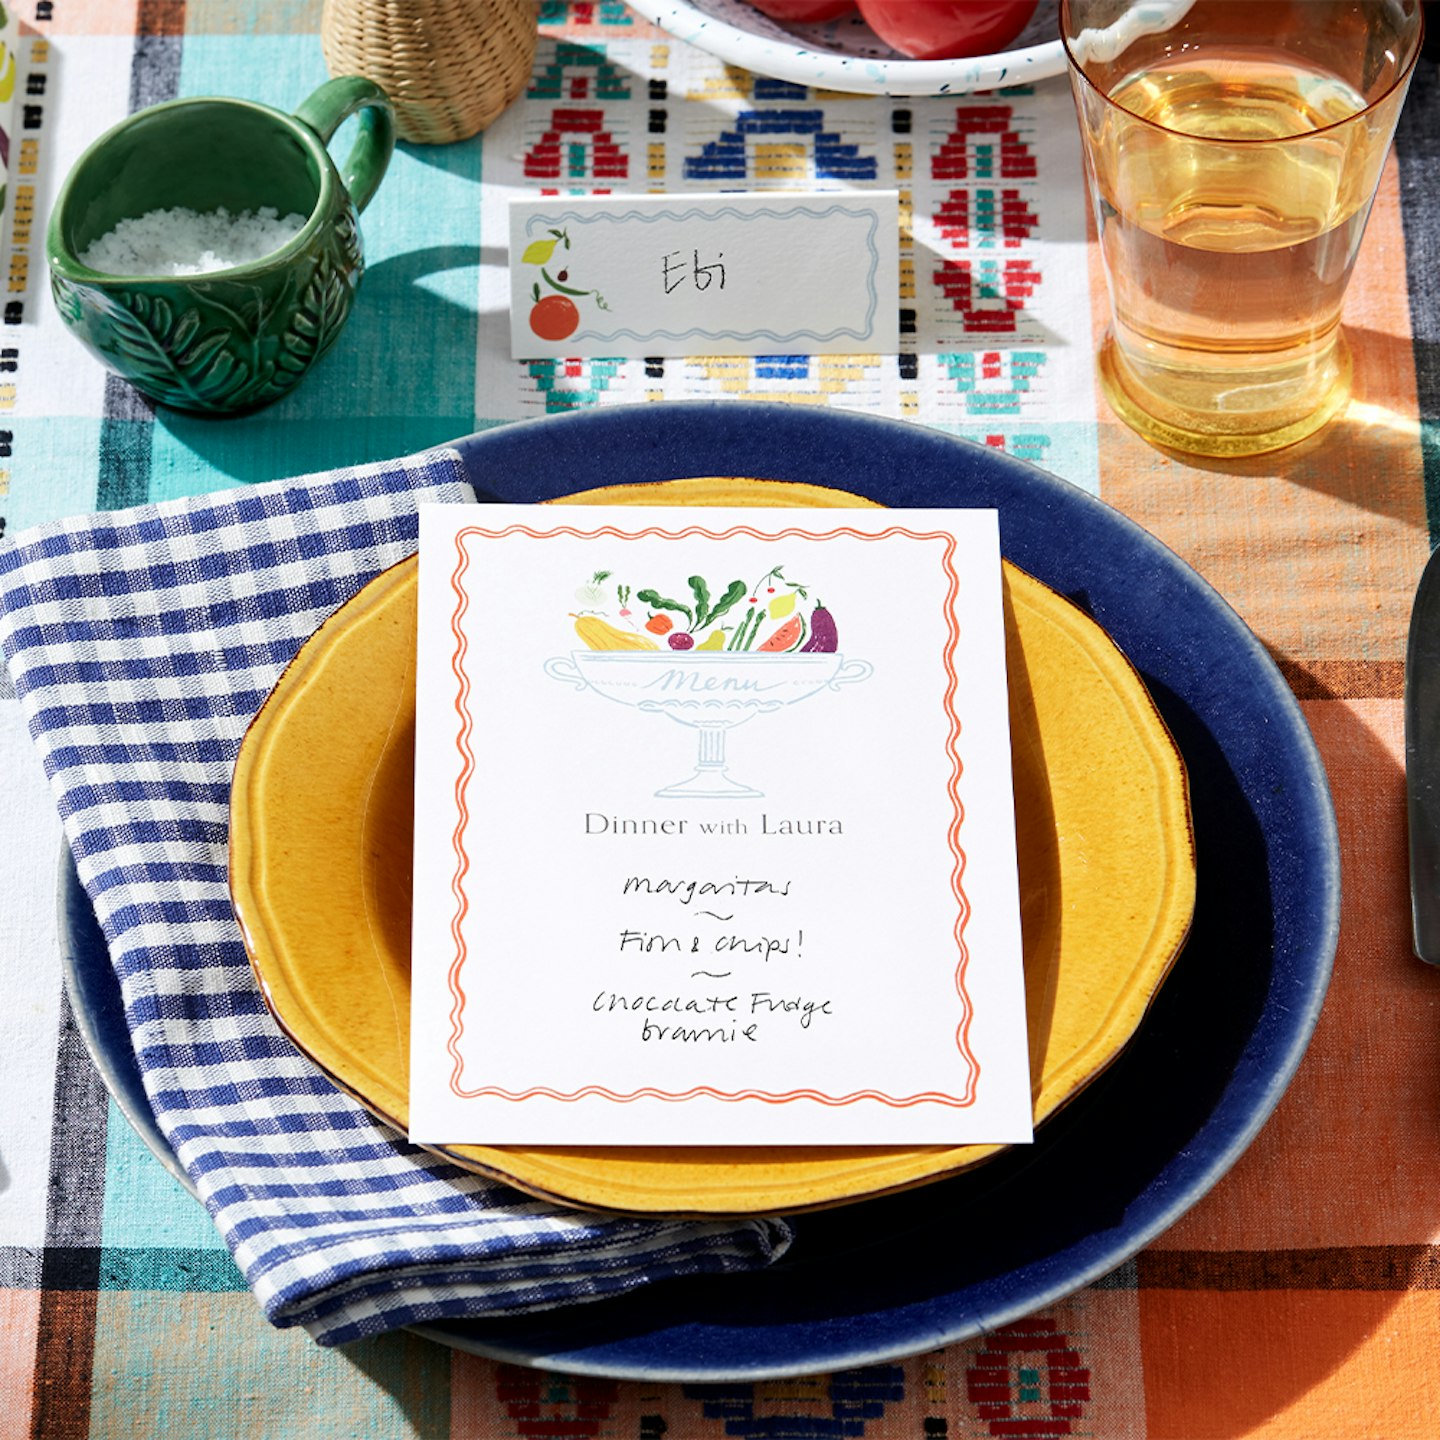 Laura Jackson for Papier, Table setting, £17.50 for 10